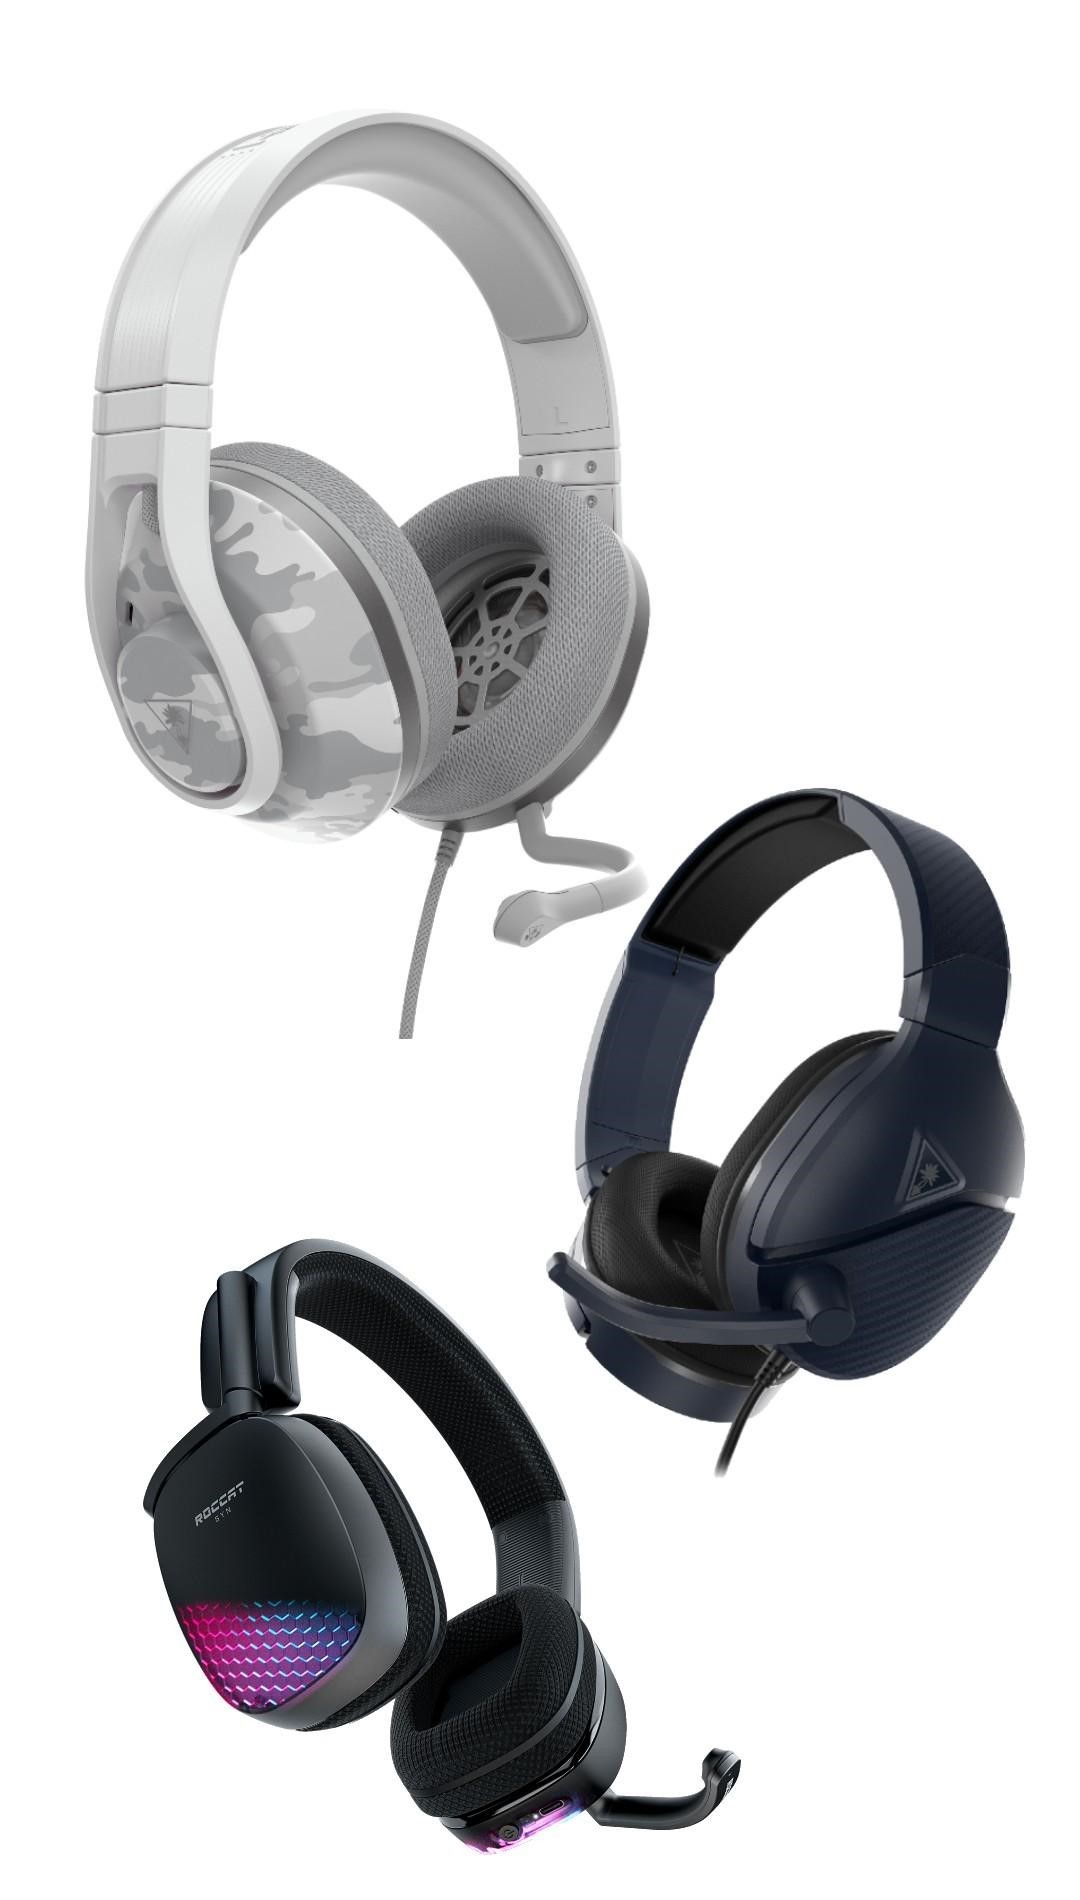 Turtle Beach, ROCCAT, and Neat Deliver Award-winning Gaming and Microphones for the | Business Wire